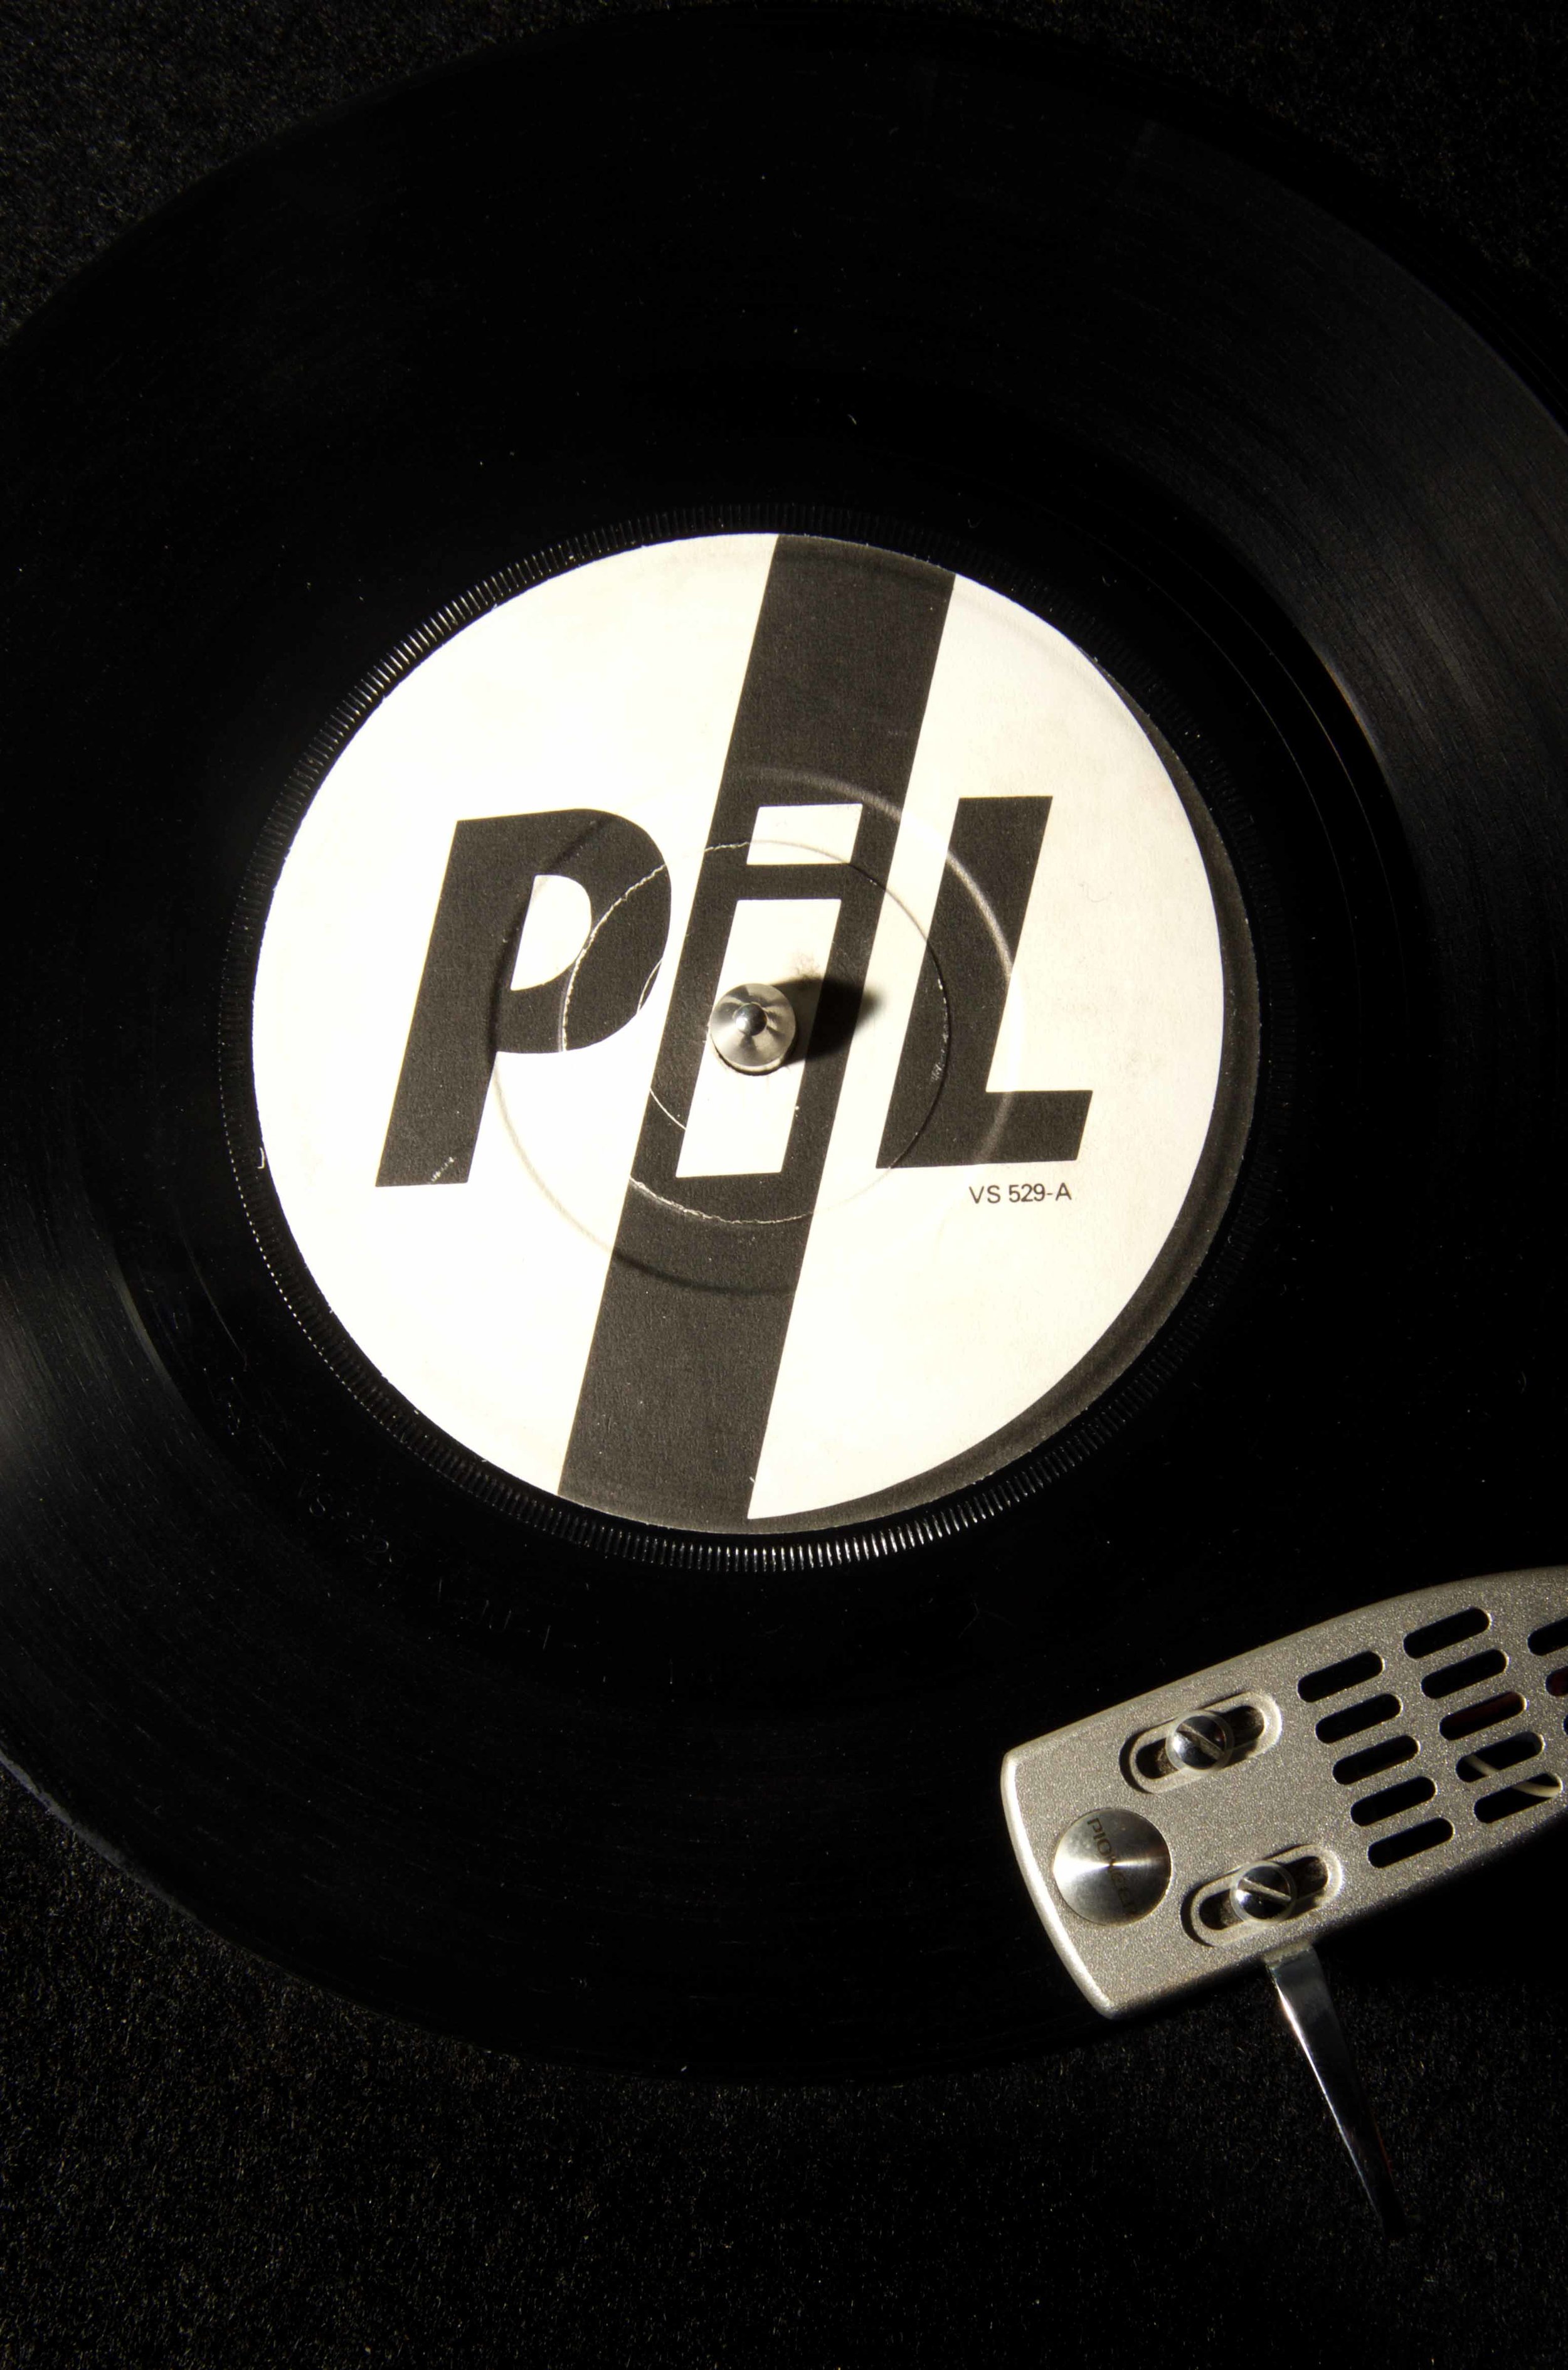 Pil this is not a love song